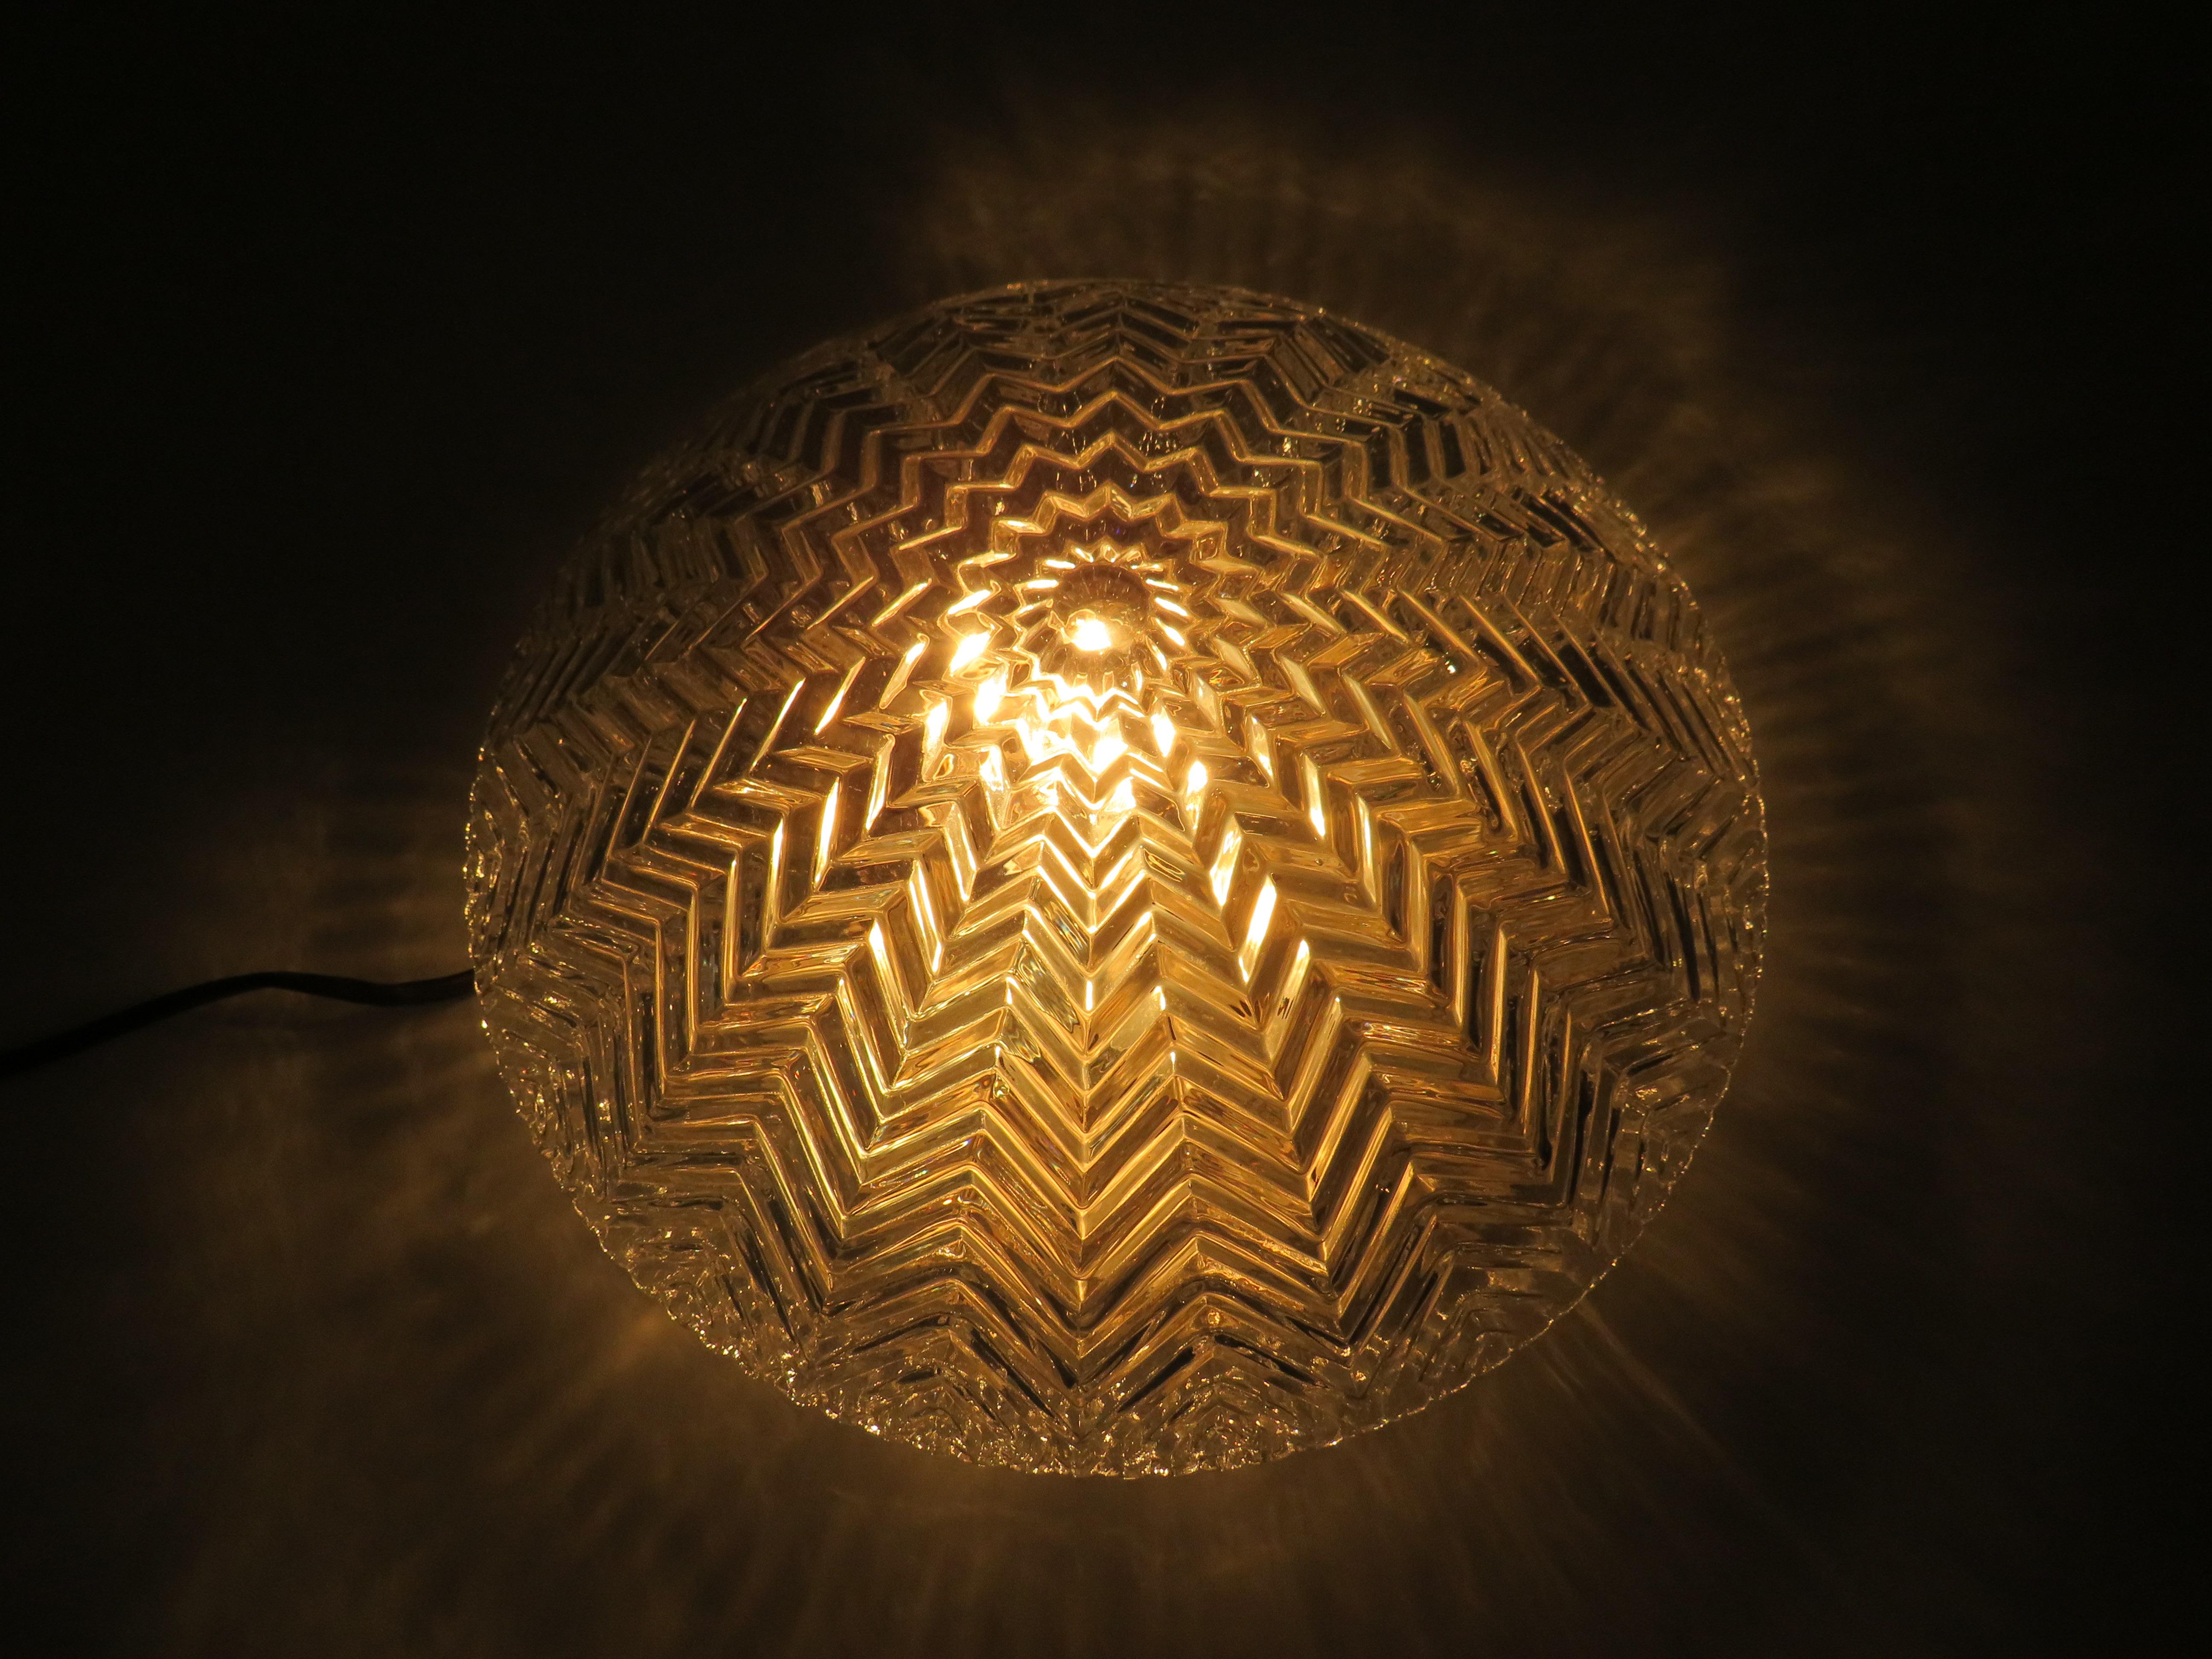 Mid-20th Century Ceiling or Wall Lamp by Glashütte Limburg, Germany 1960-1970 'Old Store Stock' For Sale